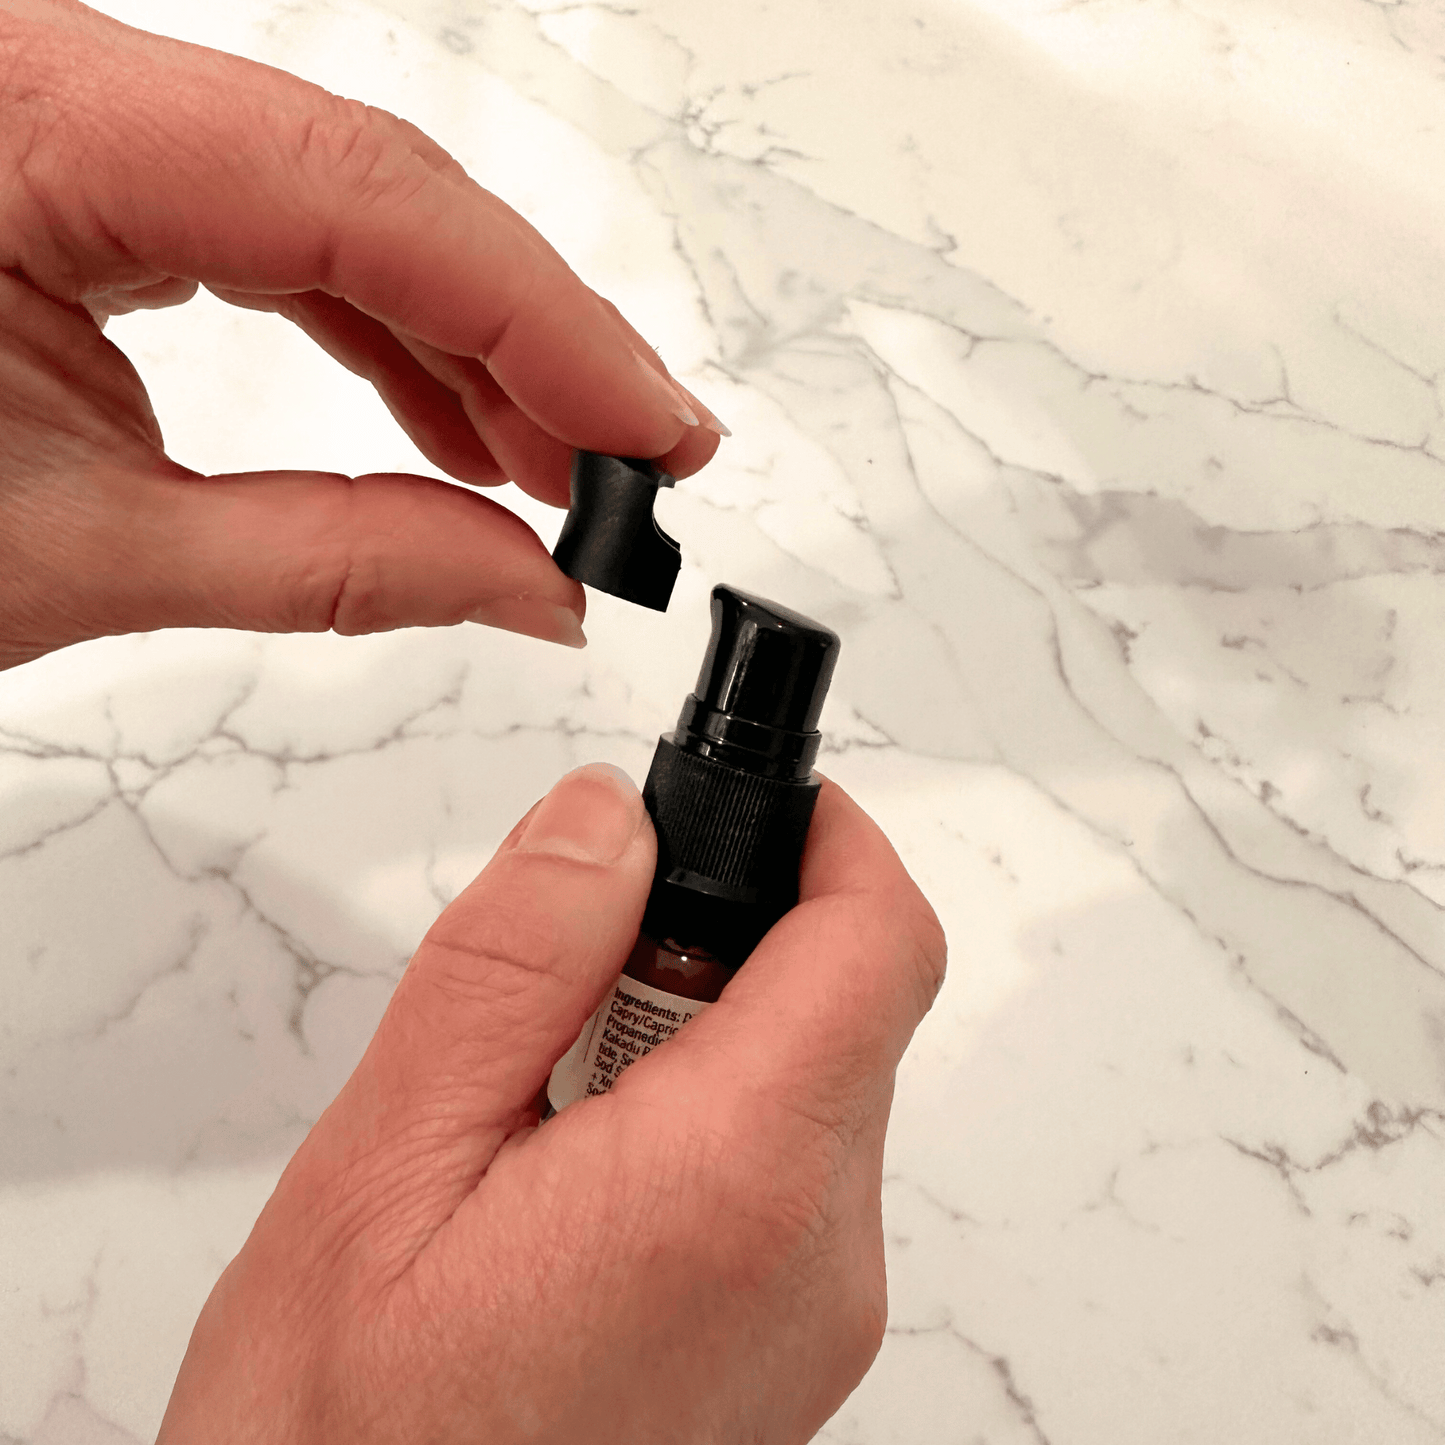 Removing the overcap on the trial size RevitaLuxe Radiance Serum